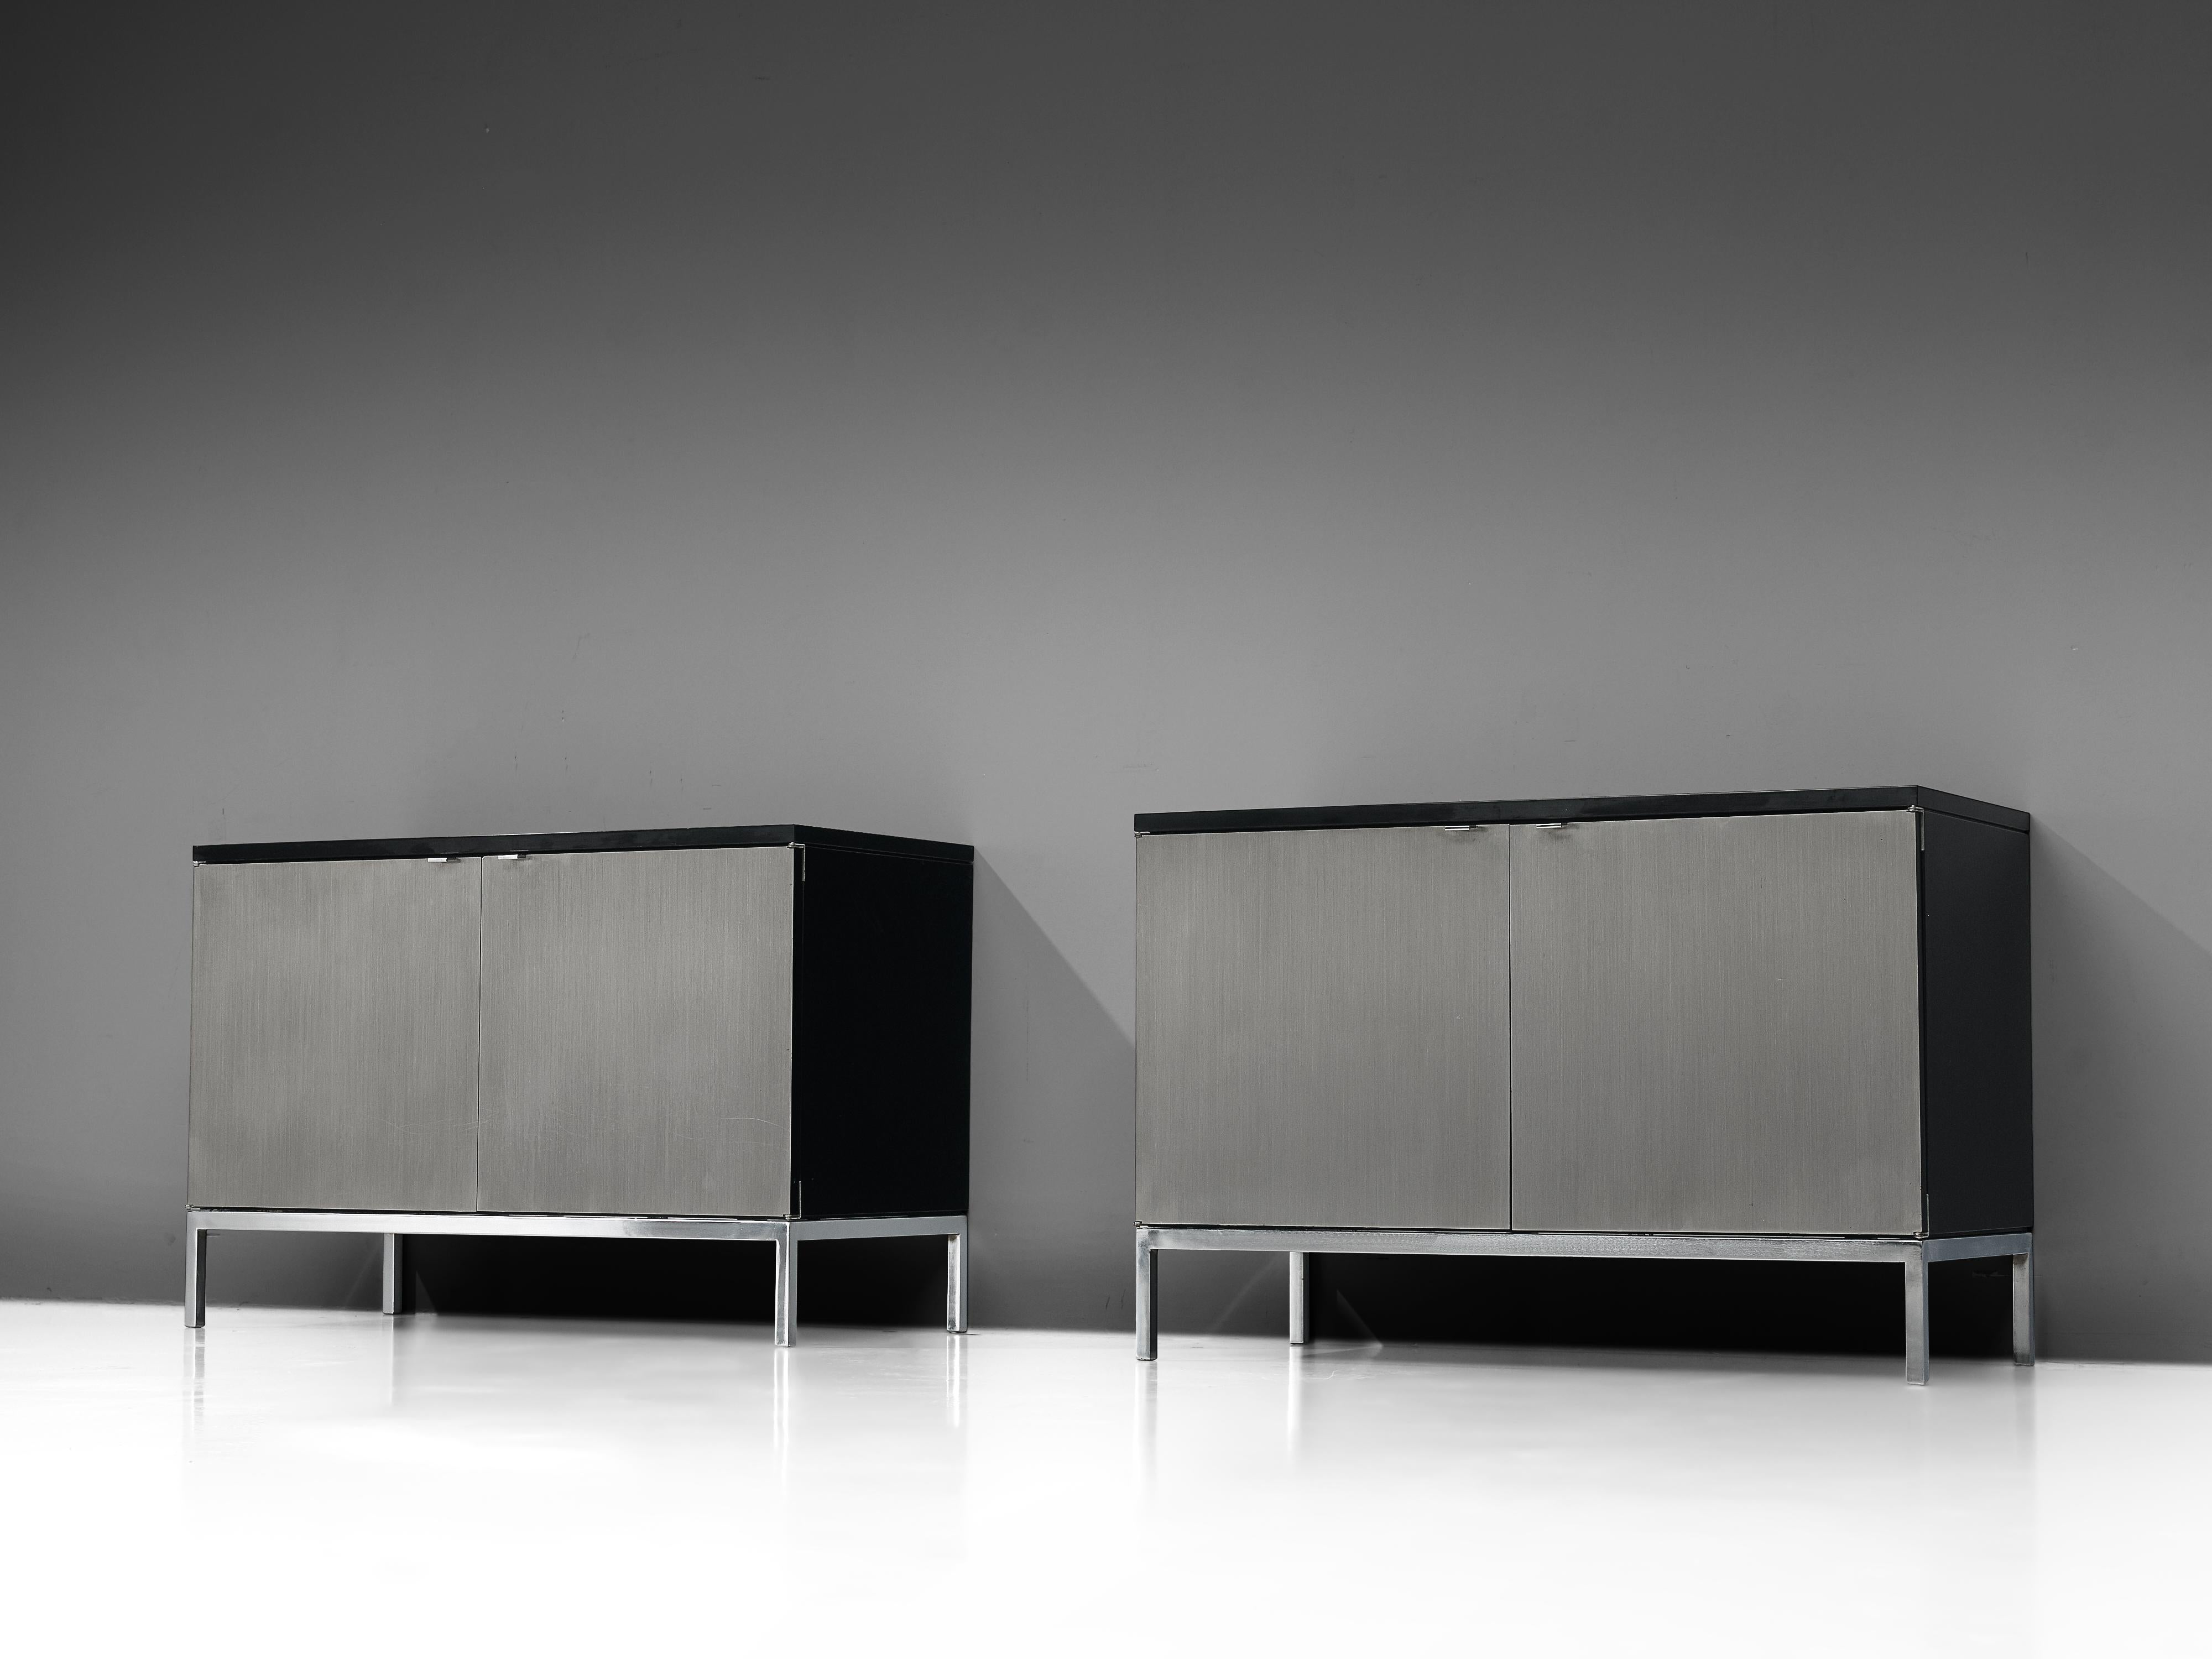 Florence Knoll for Knoll International, two sideboards, oak, brushed steel, United States, design 1960s

Two modest sized credenzas with a chrome base designed by Florence Knoll for Knoll International. These exceptional and minimalistic designed